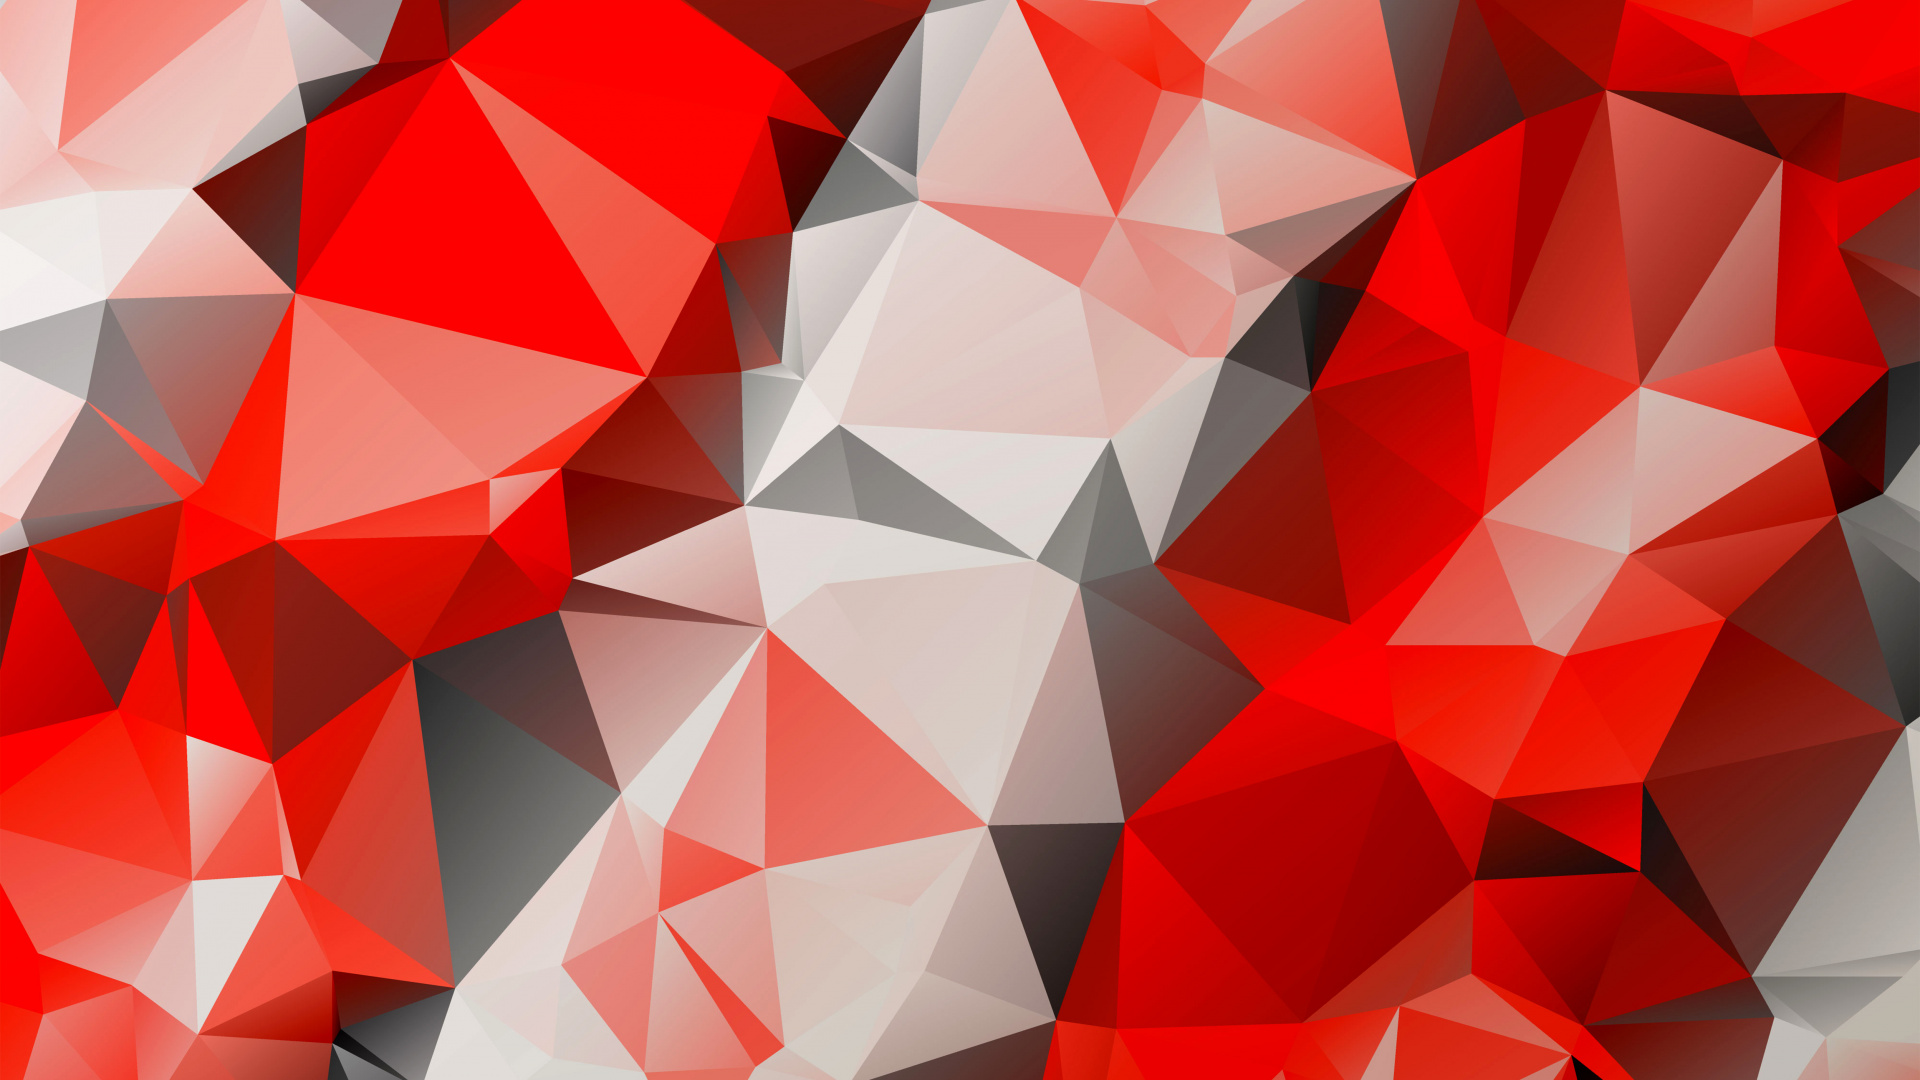 Red and White Abstract Painting. Wallpaper in 1920x1080 Resolution